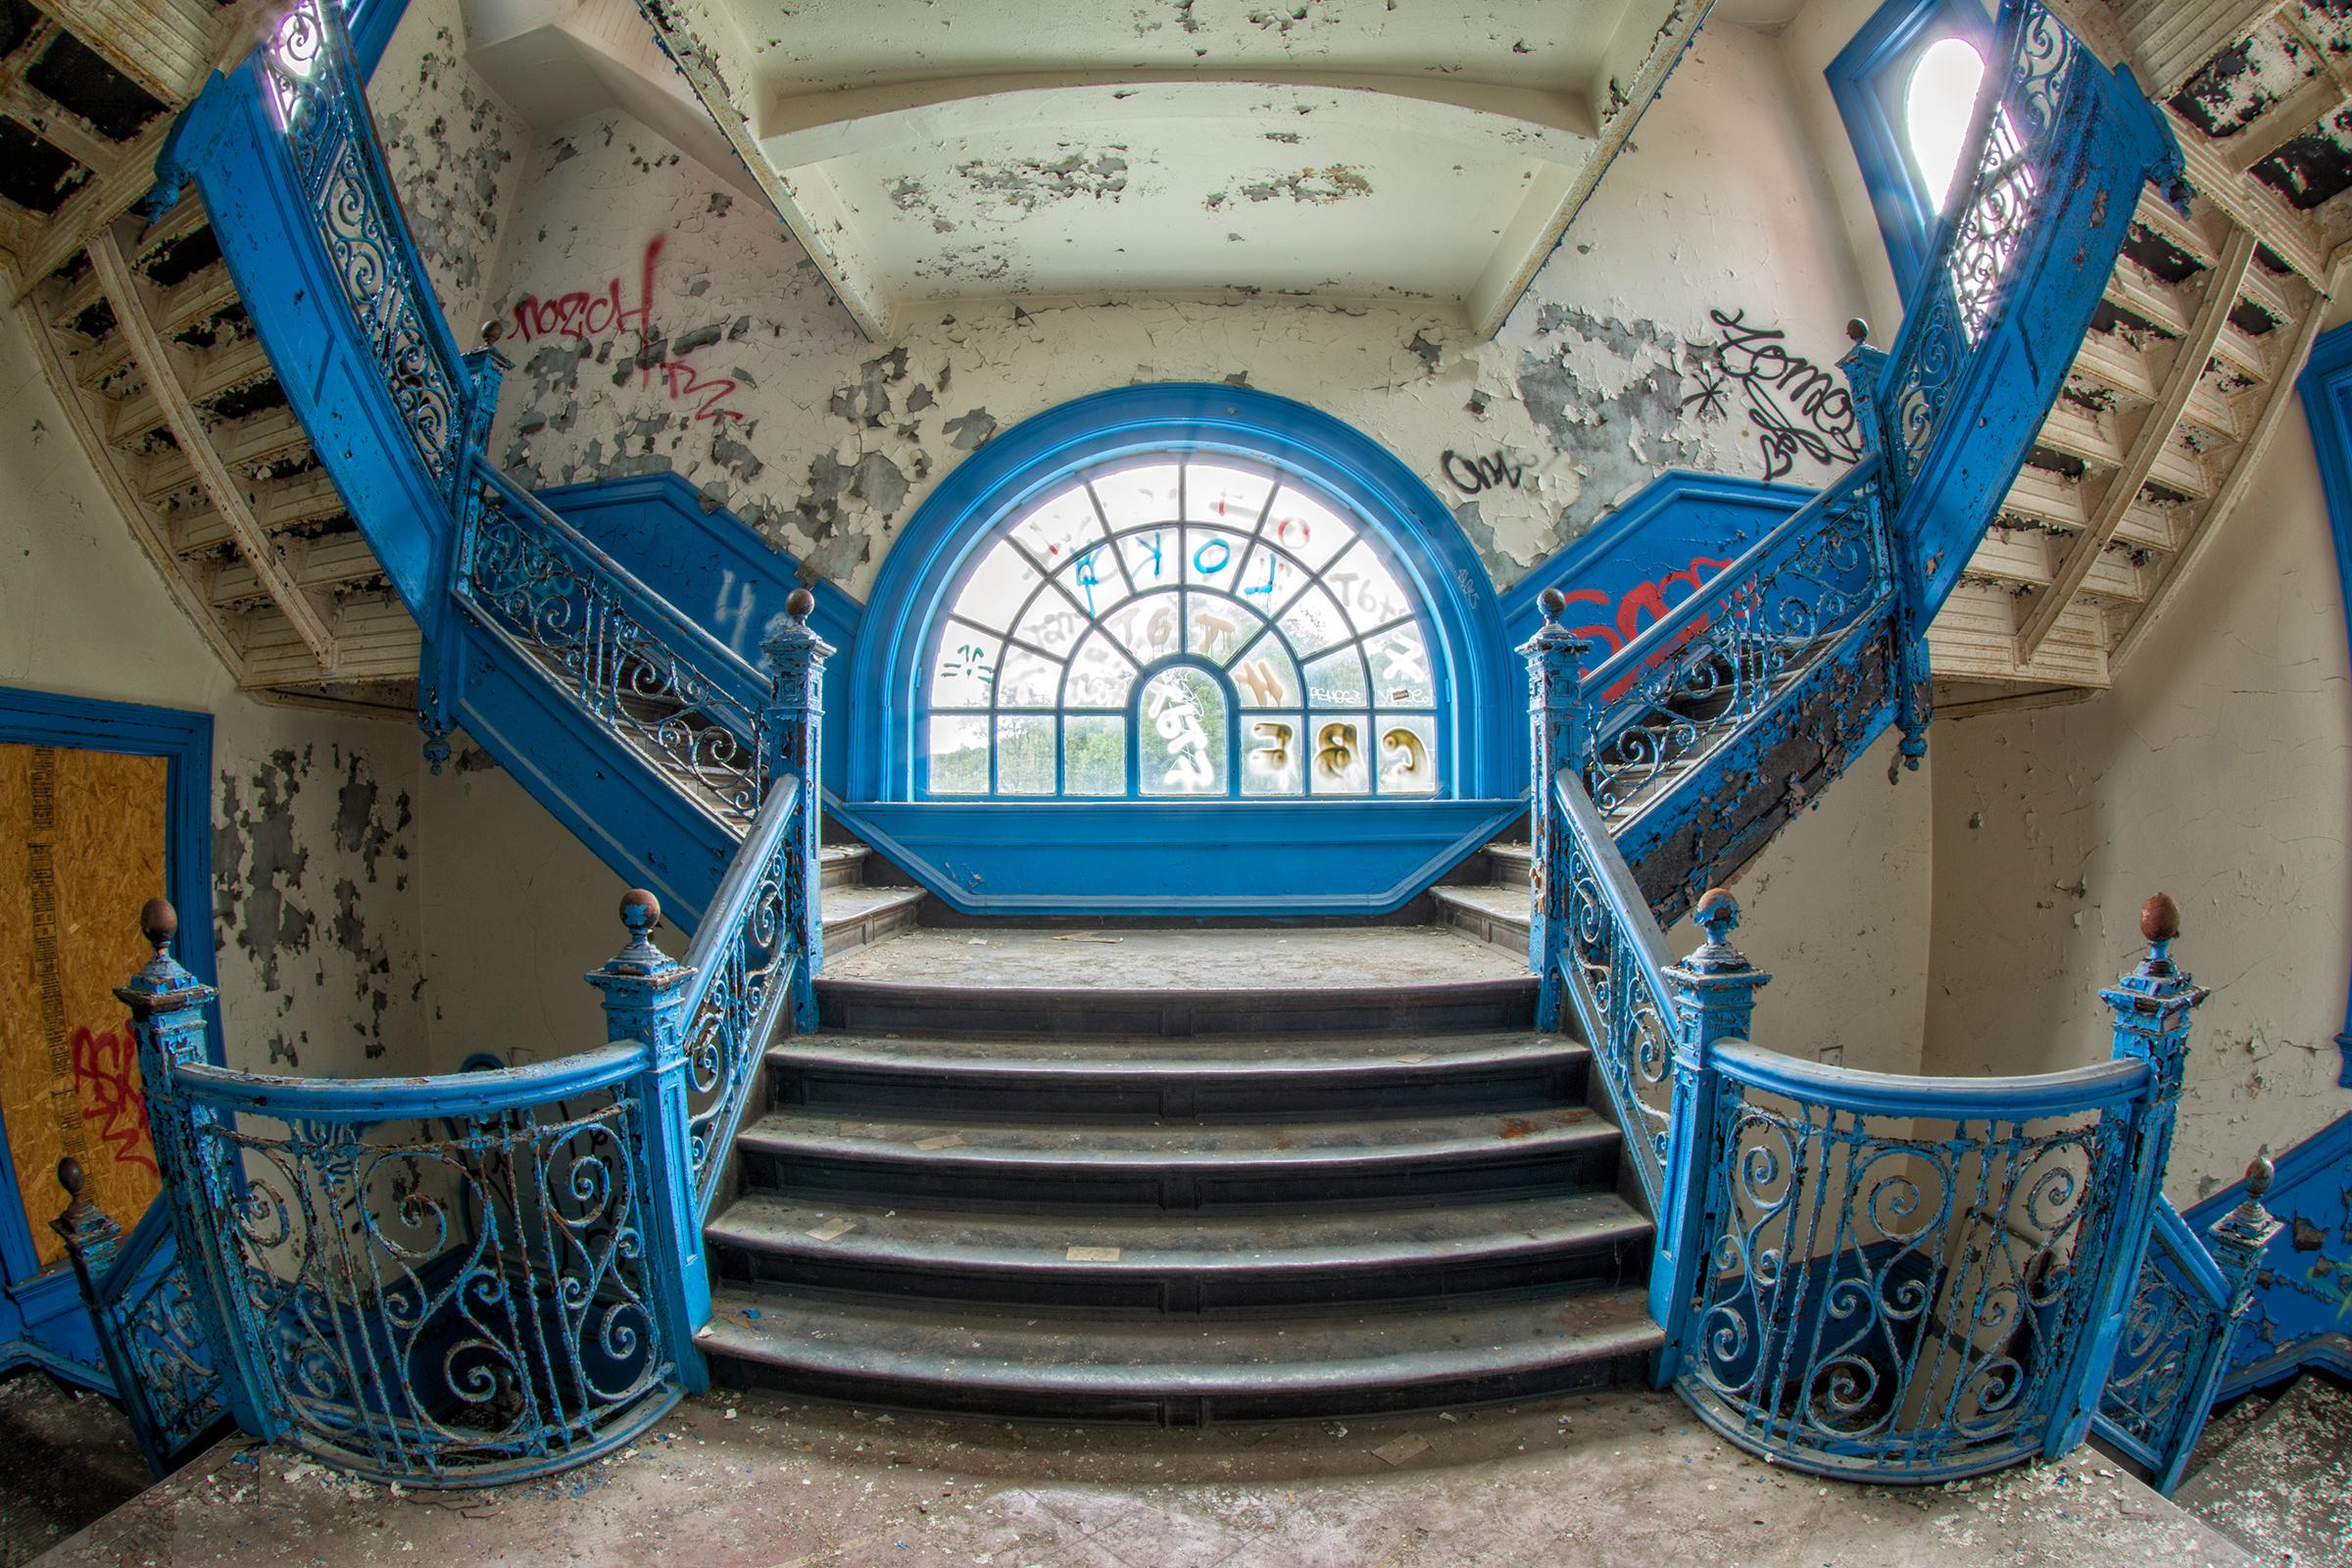 Rebecca Skinner Color Photograph - "Faded Footsteps", abandoned school, blue, iron, stairs, metal print, photograph